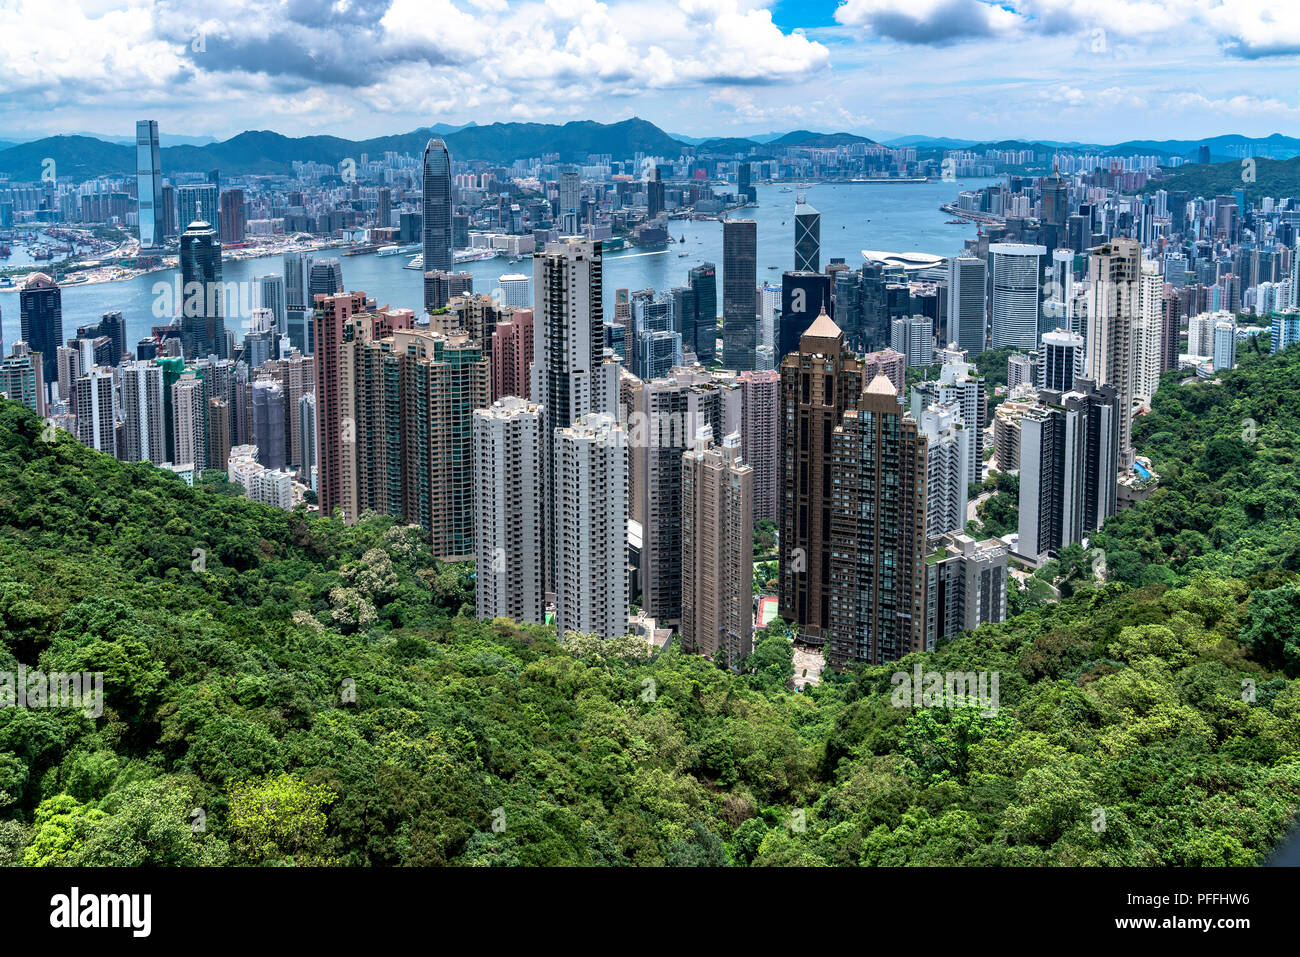 HongKong Skyline against a backdrop of green vegetation, blue ocean and distant mountains Stock Photo